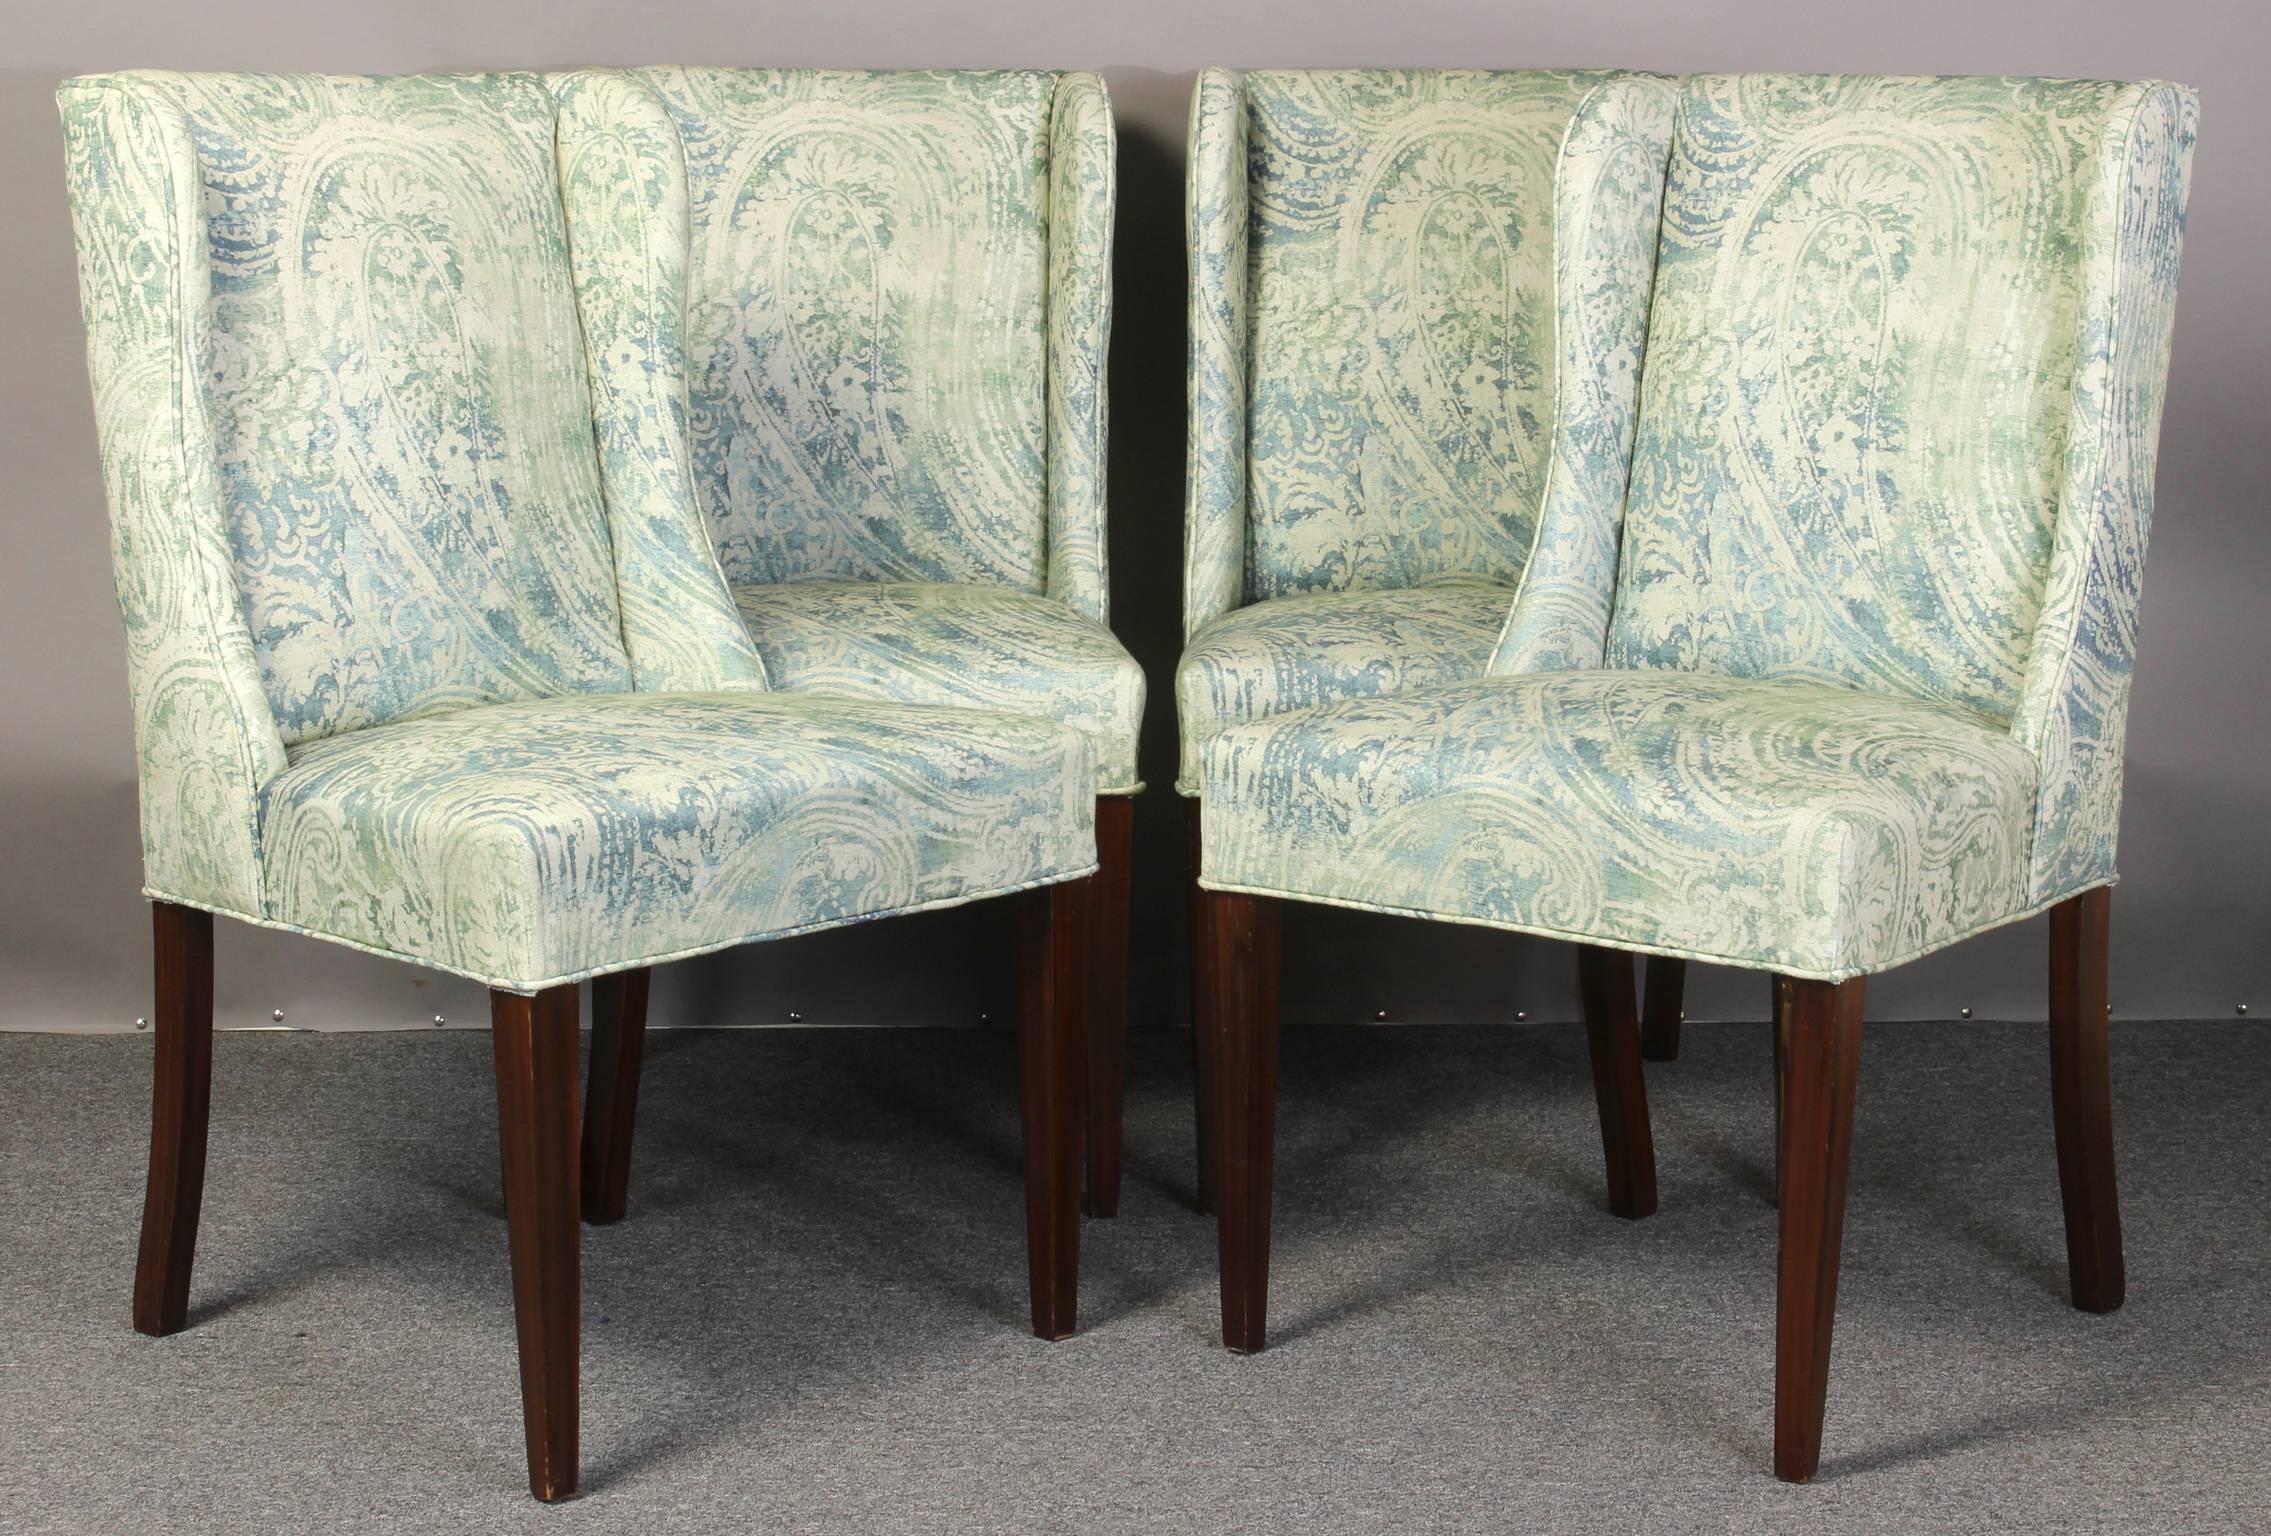 A set of four mid-20th century upholstered stylized wingback dining chairs newly covered in a soft blue-green Italian linen fabric with faux wood grain painted square tapering legs. Would make sensational games table chairs.